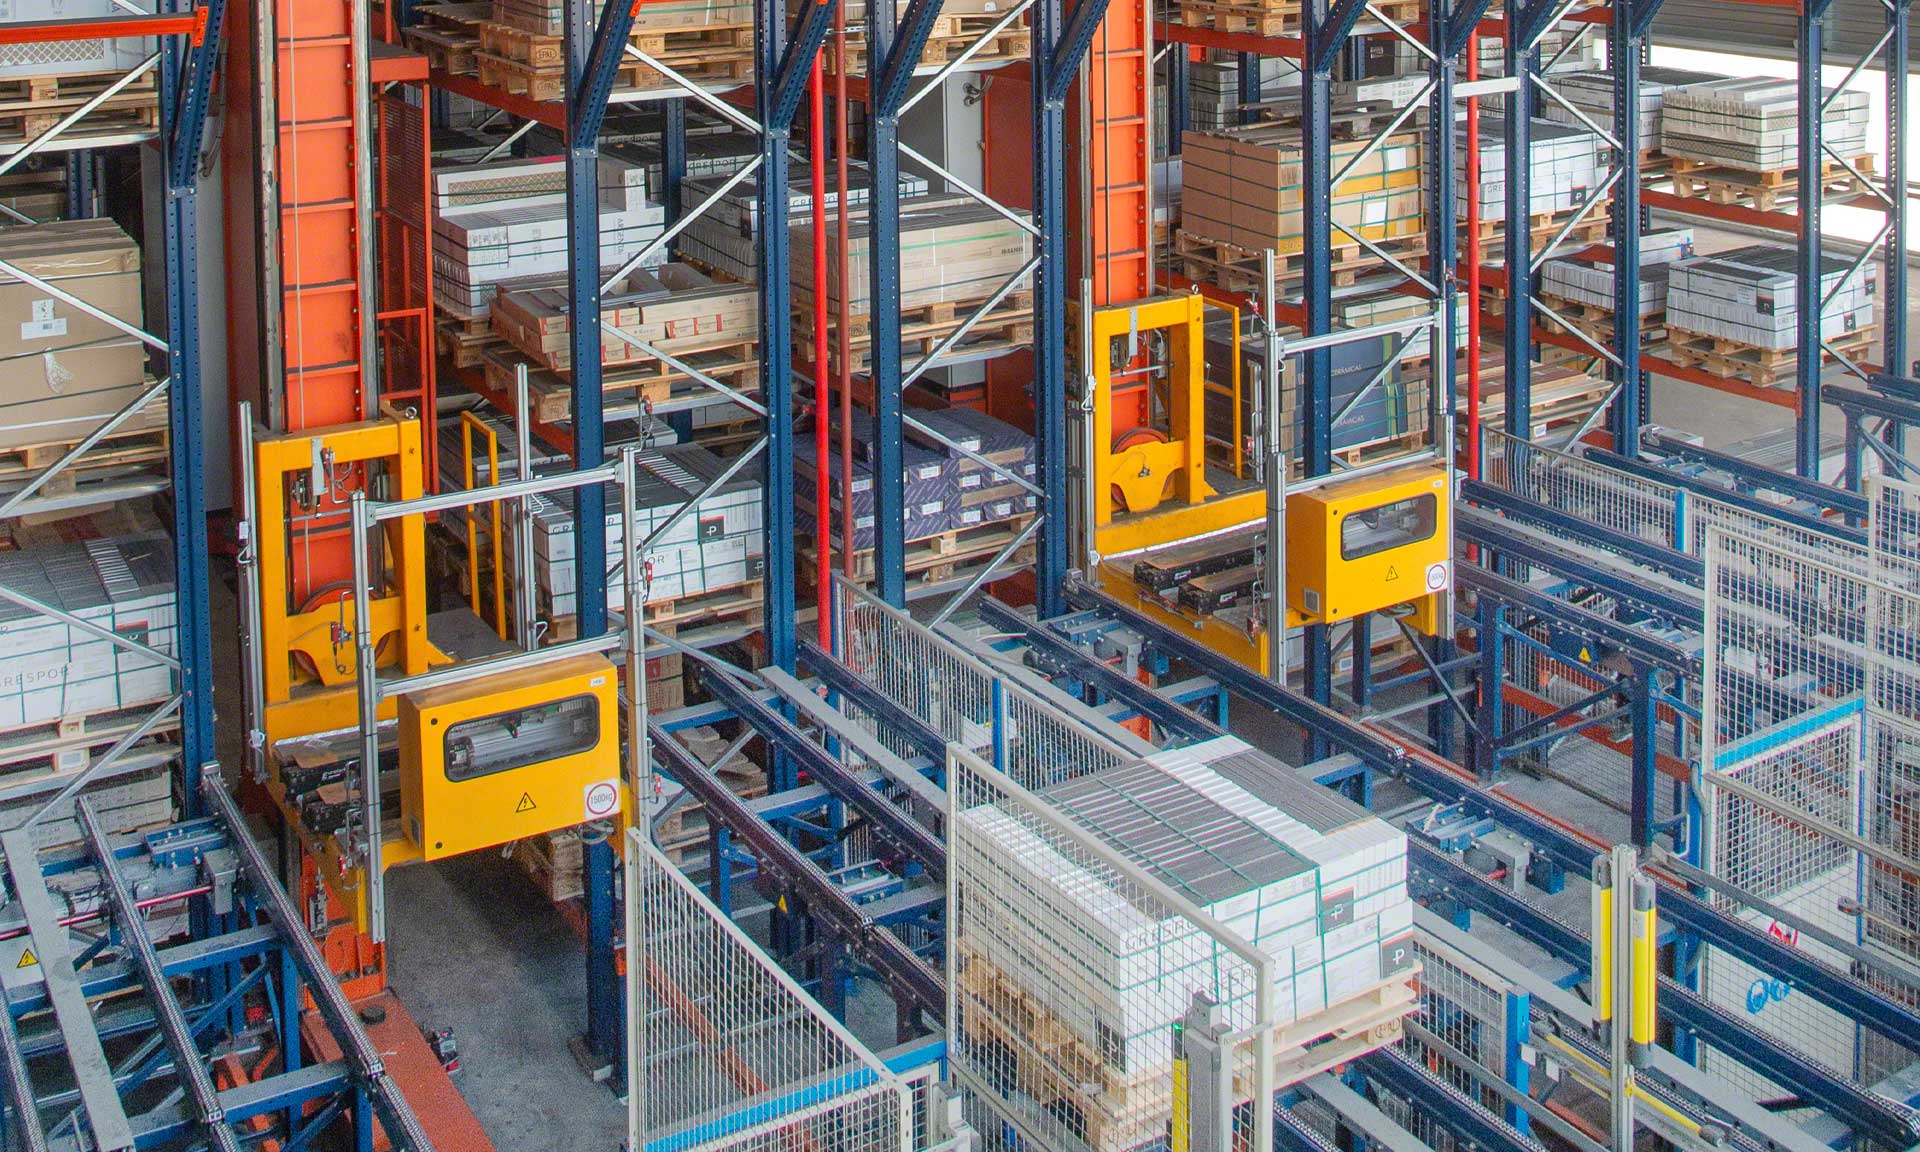 Tile company VM Matériaux automates its warehouse to boost throughput and simplify processes